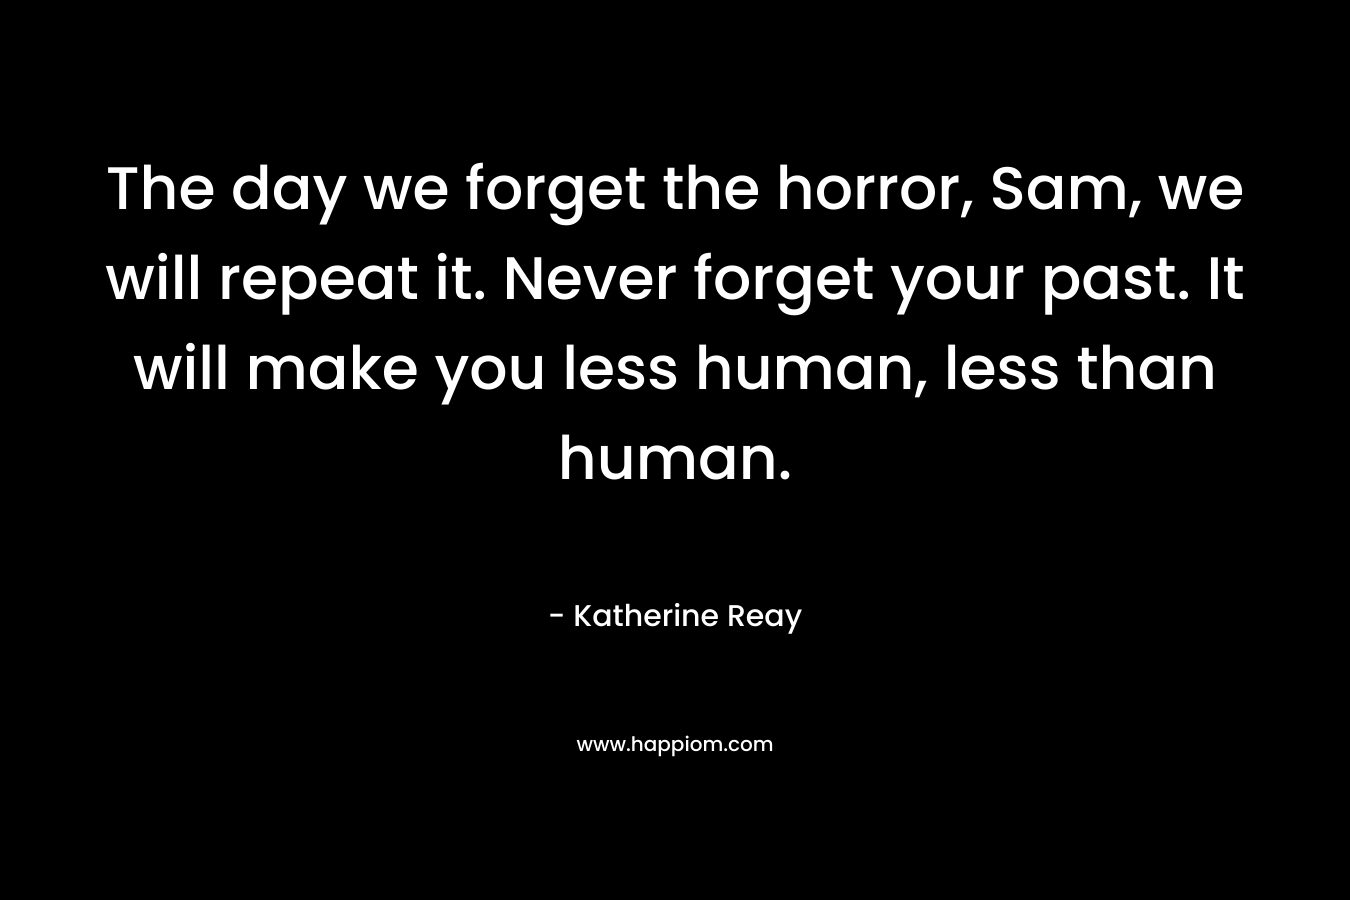 The day we forget the horror, Sam, we will repeat it. Never forget your past. It will make you less human, less than human. – Katherine Reay